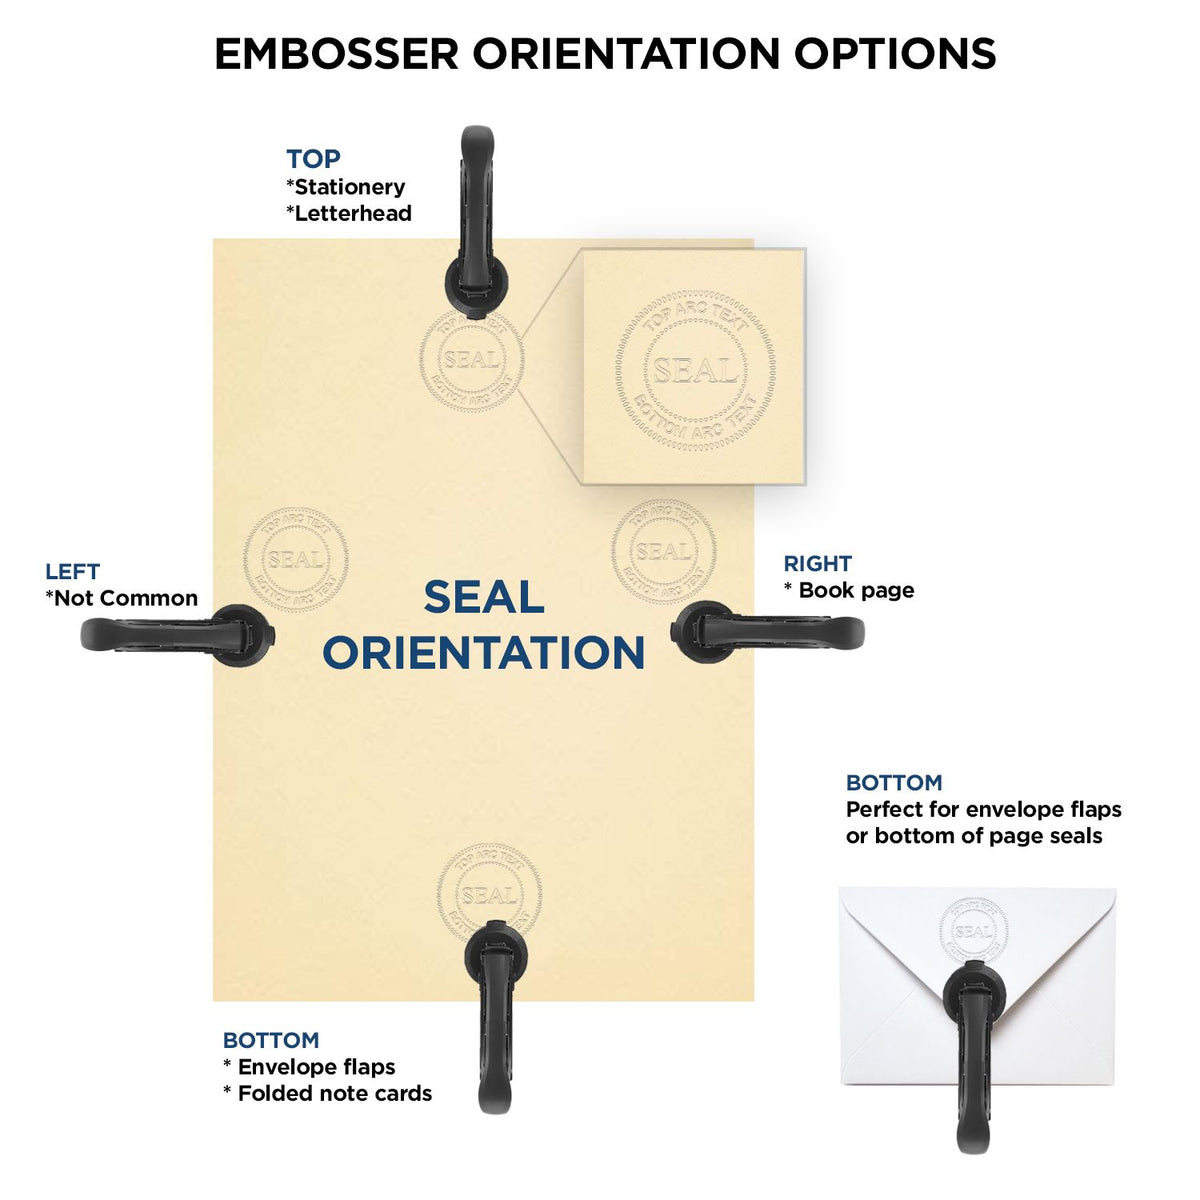 An infographic for the Handheld Missouri Land Surveyor Seal showing embosser orientation, this is showing examples of a top, bottom, right and left insert.